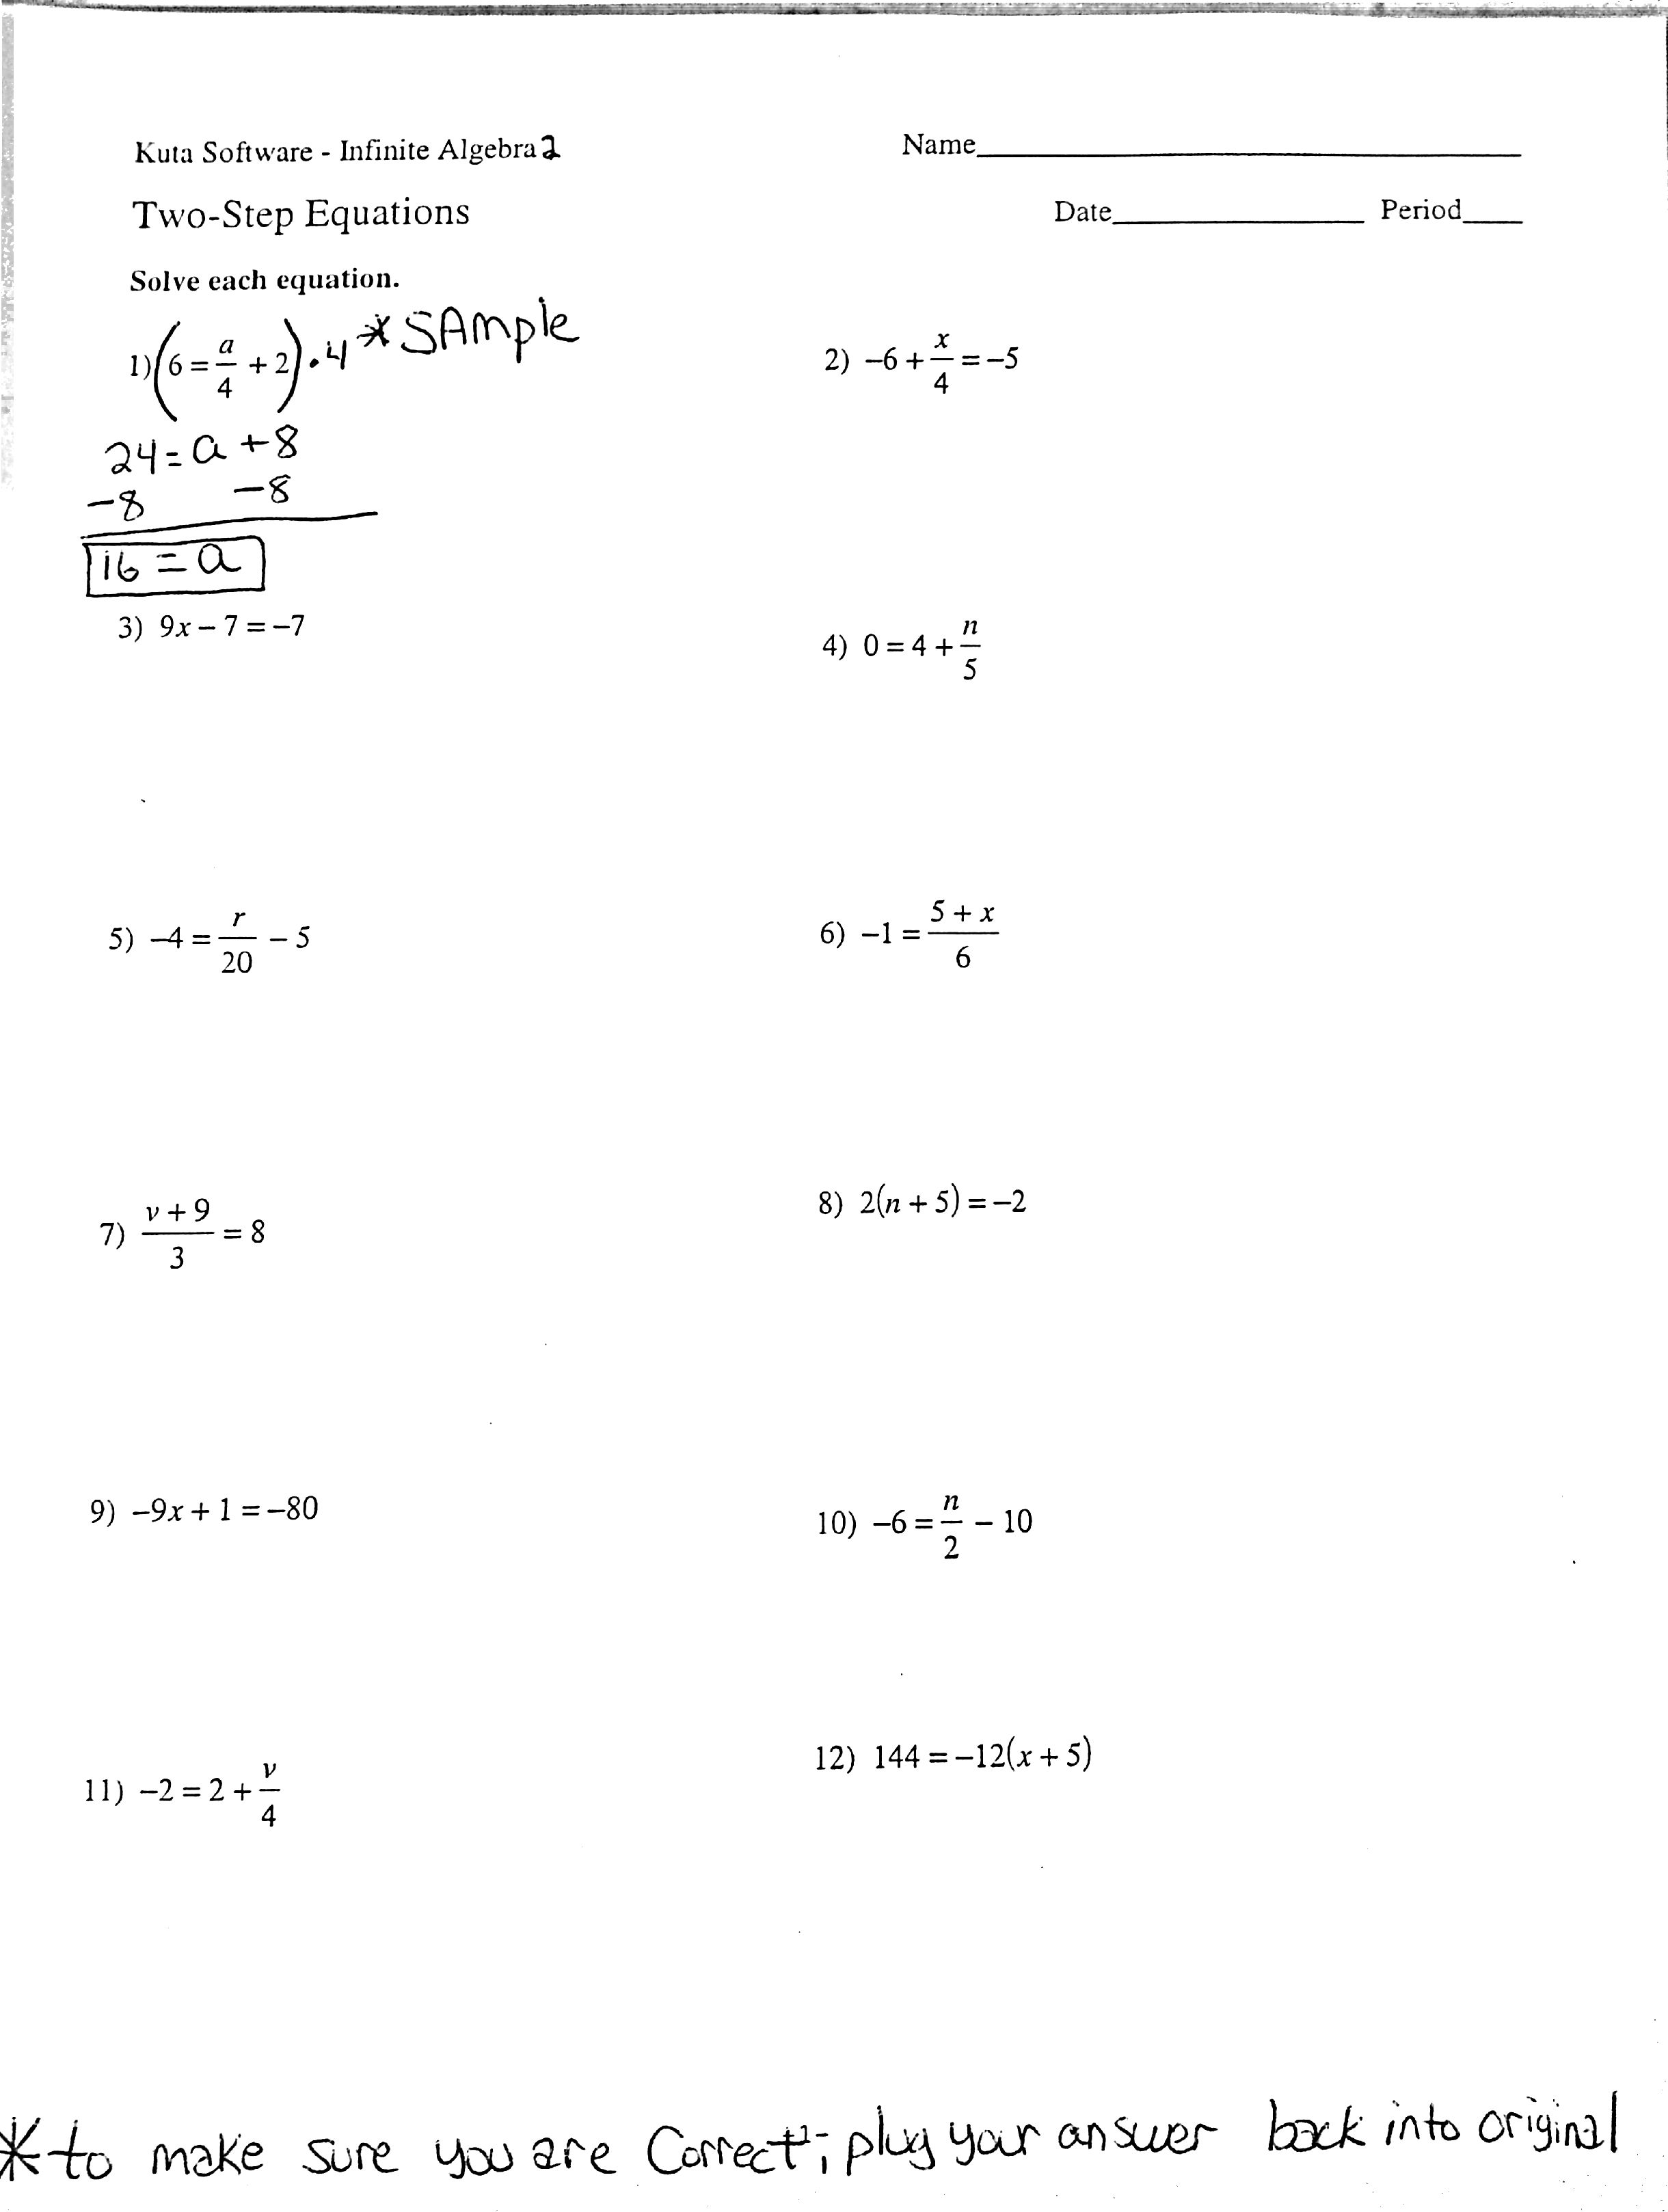 9 Best Images of Two-Step Equations Worksheets With Answer Key - Two-Step Equations Worksheet